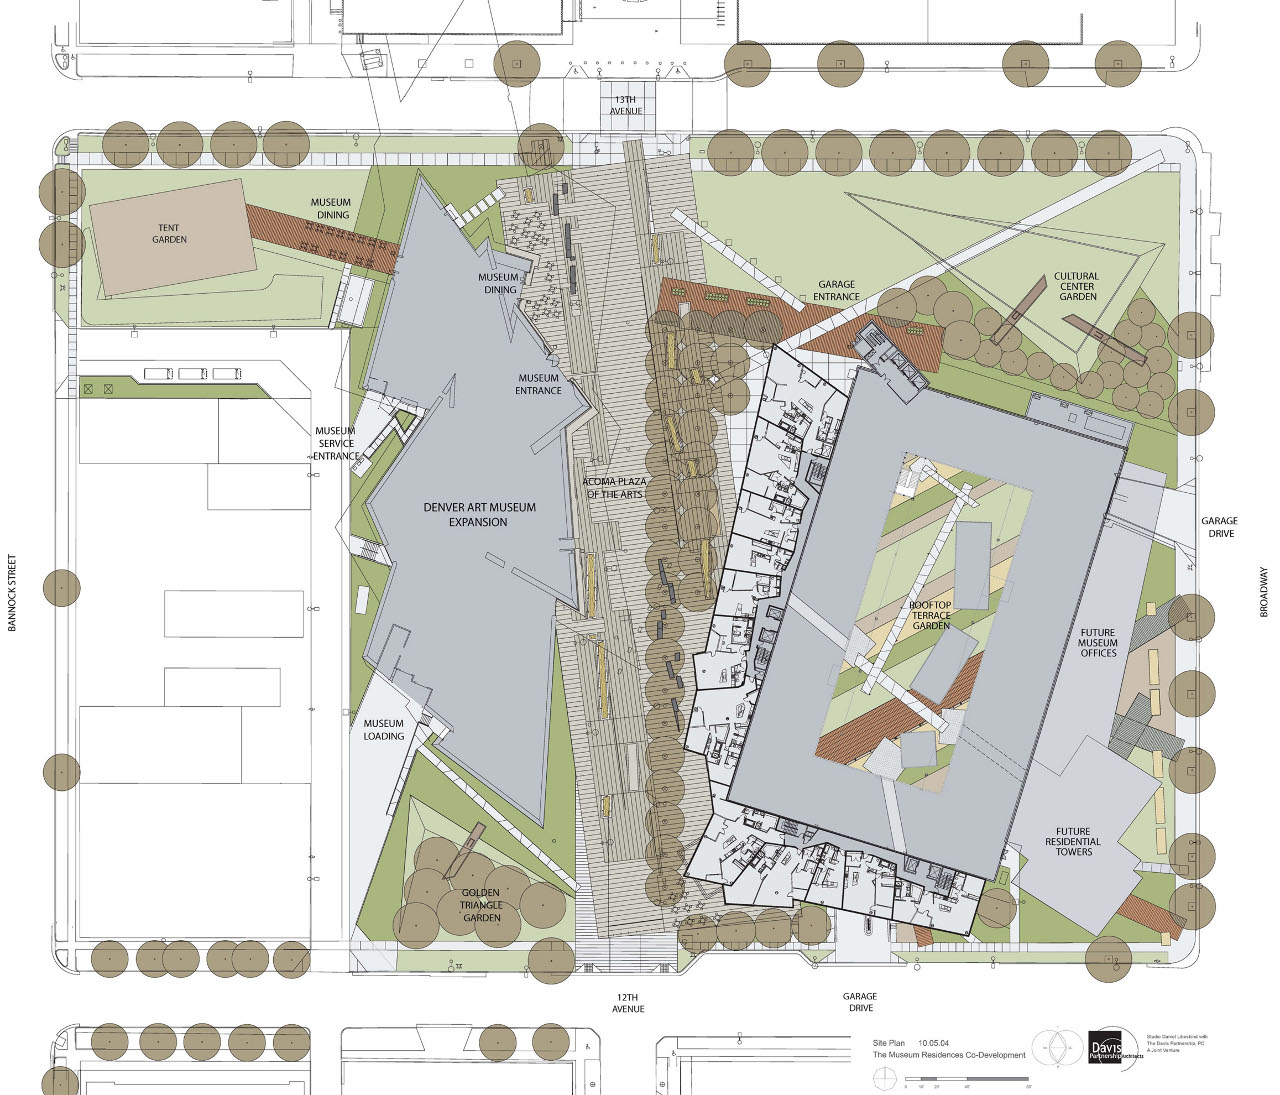 The site plan of Denver's Museum Residences and Denver Art Museum by Daniel Libeskind